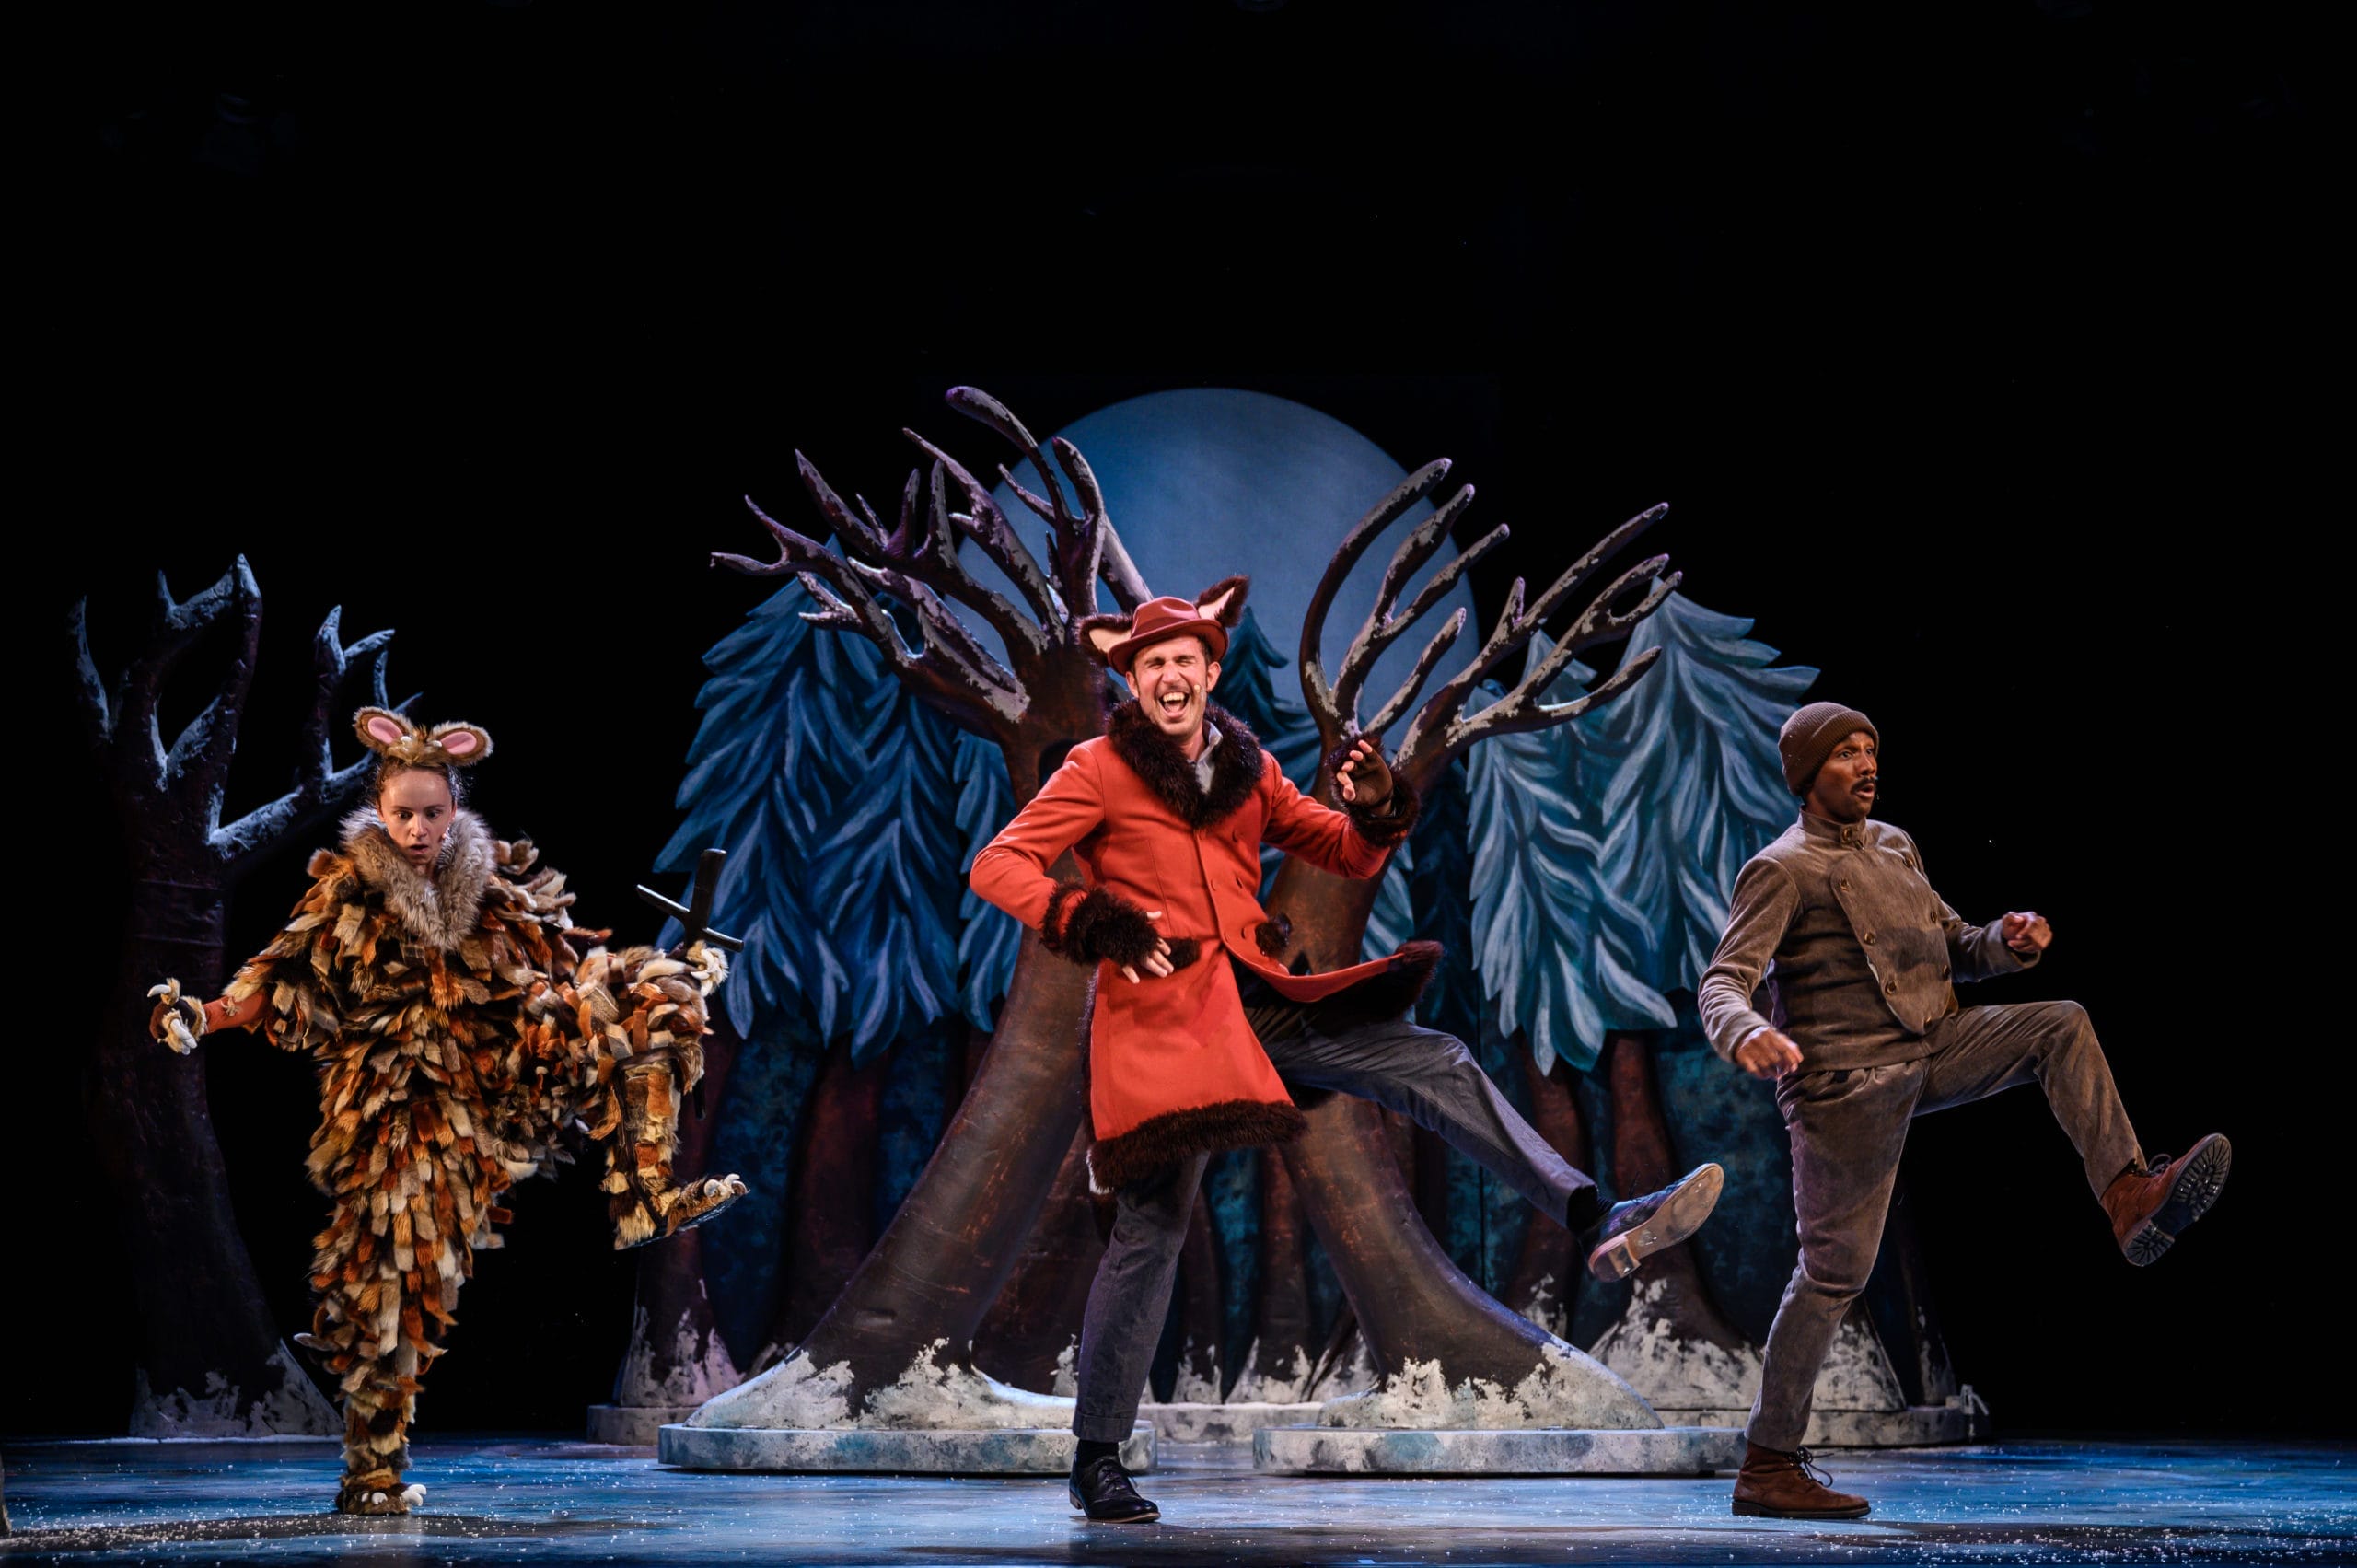 Production shot from The Gruffalo's Child artsdepot! The Gruffalo's Child, Fox and Mouse are dancing with their right legs kicking in the air. Behind them is snowy woodland scenery.